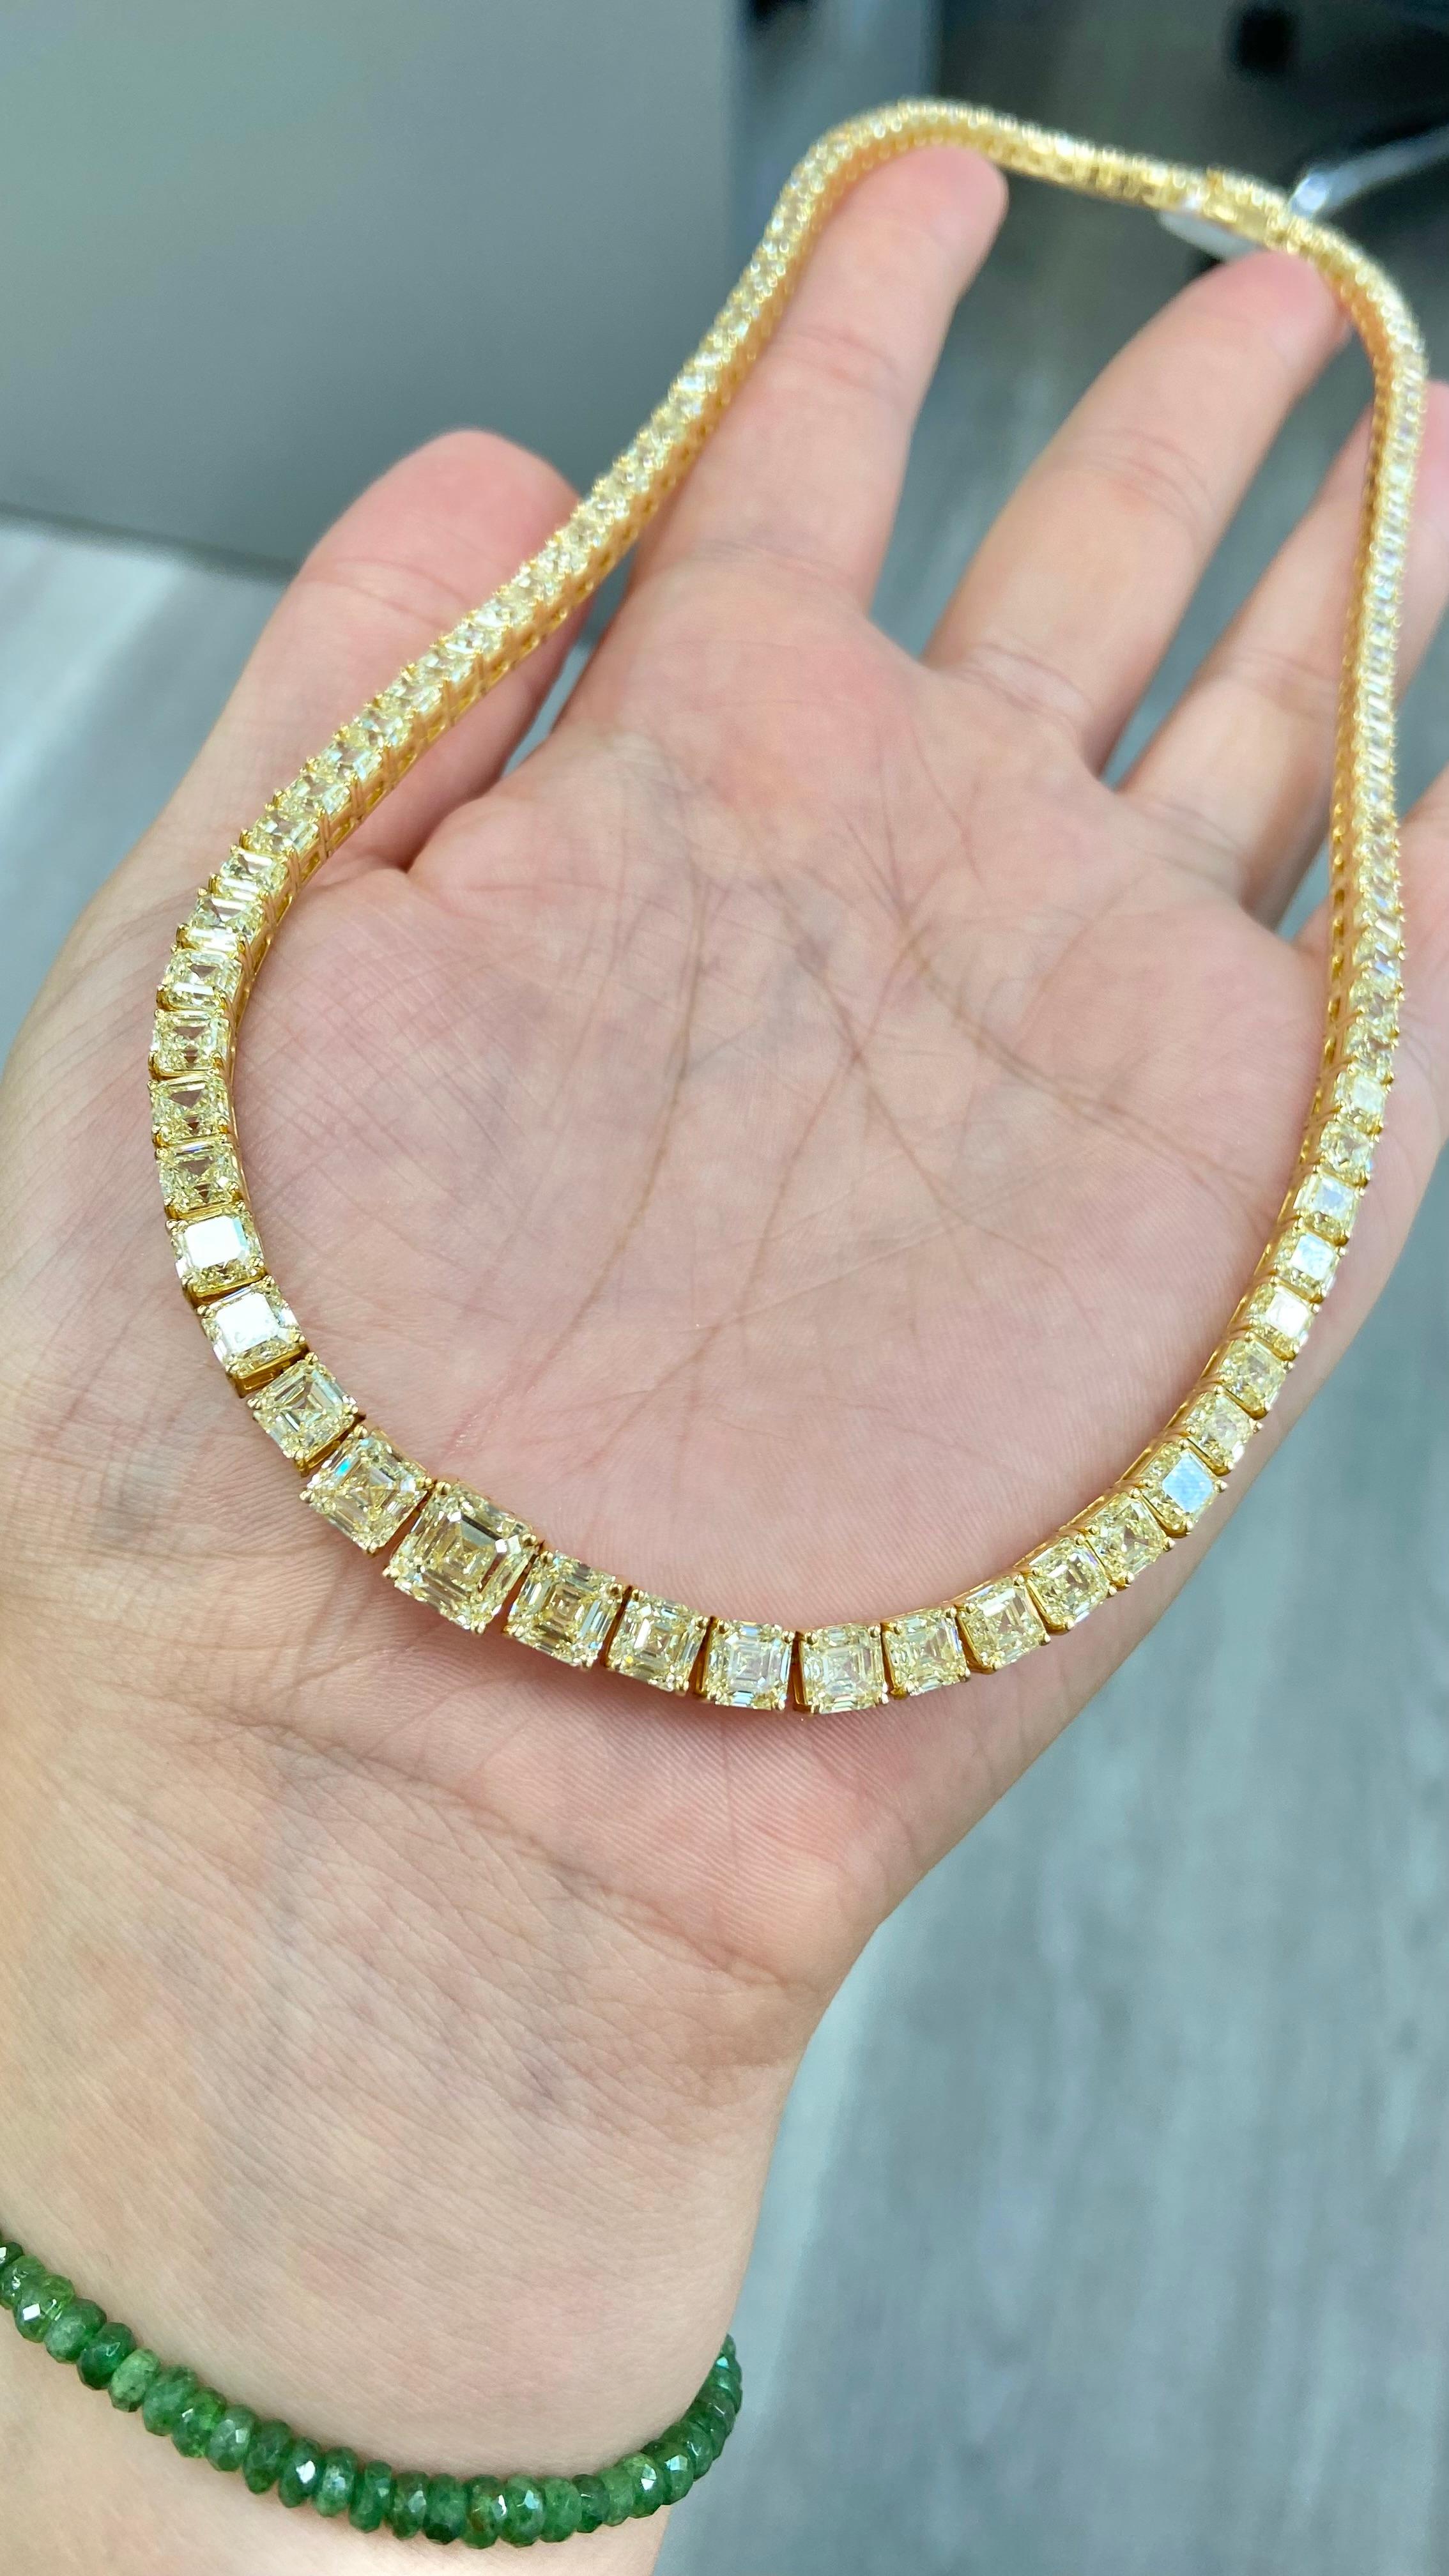 Riviera Tennis Necklace - diamonds gradually increasing in size toward the front of the necklace.
37 carats total yellow diamonds asscher cut diamonds (square emerald cuts) 
Featuring a 2.00 Carat Light Yellow Asscher Cut Center VS1 Clarity in the